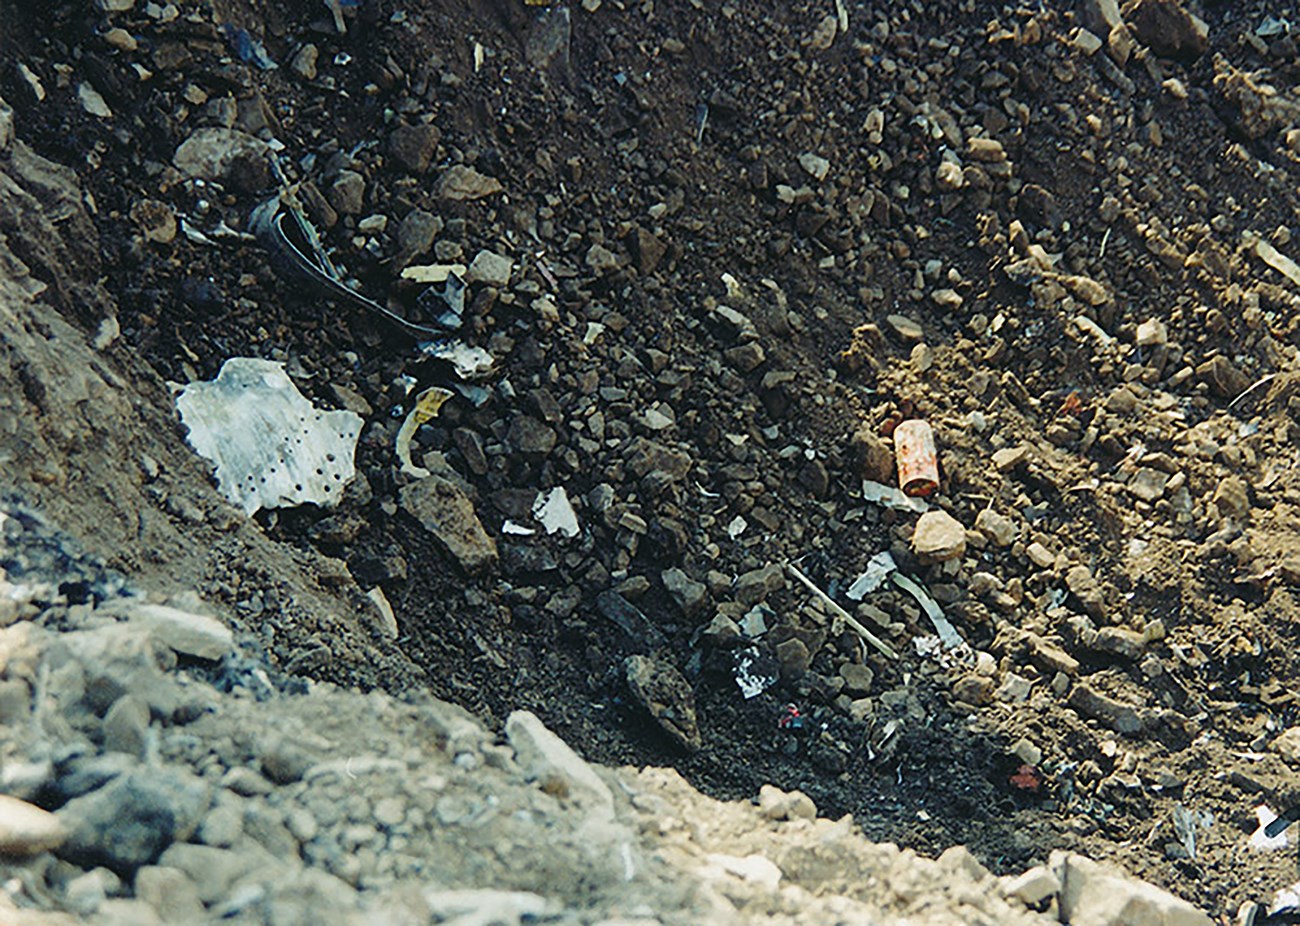 Debris, including the Flight Data Recorder is scattered near the crash site of Flight 93